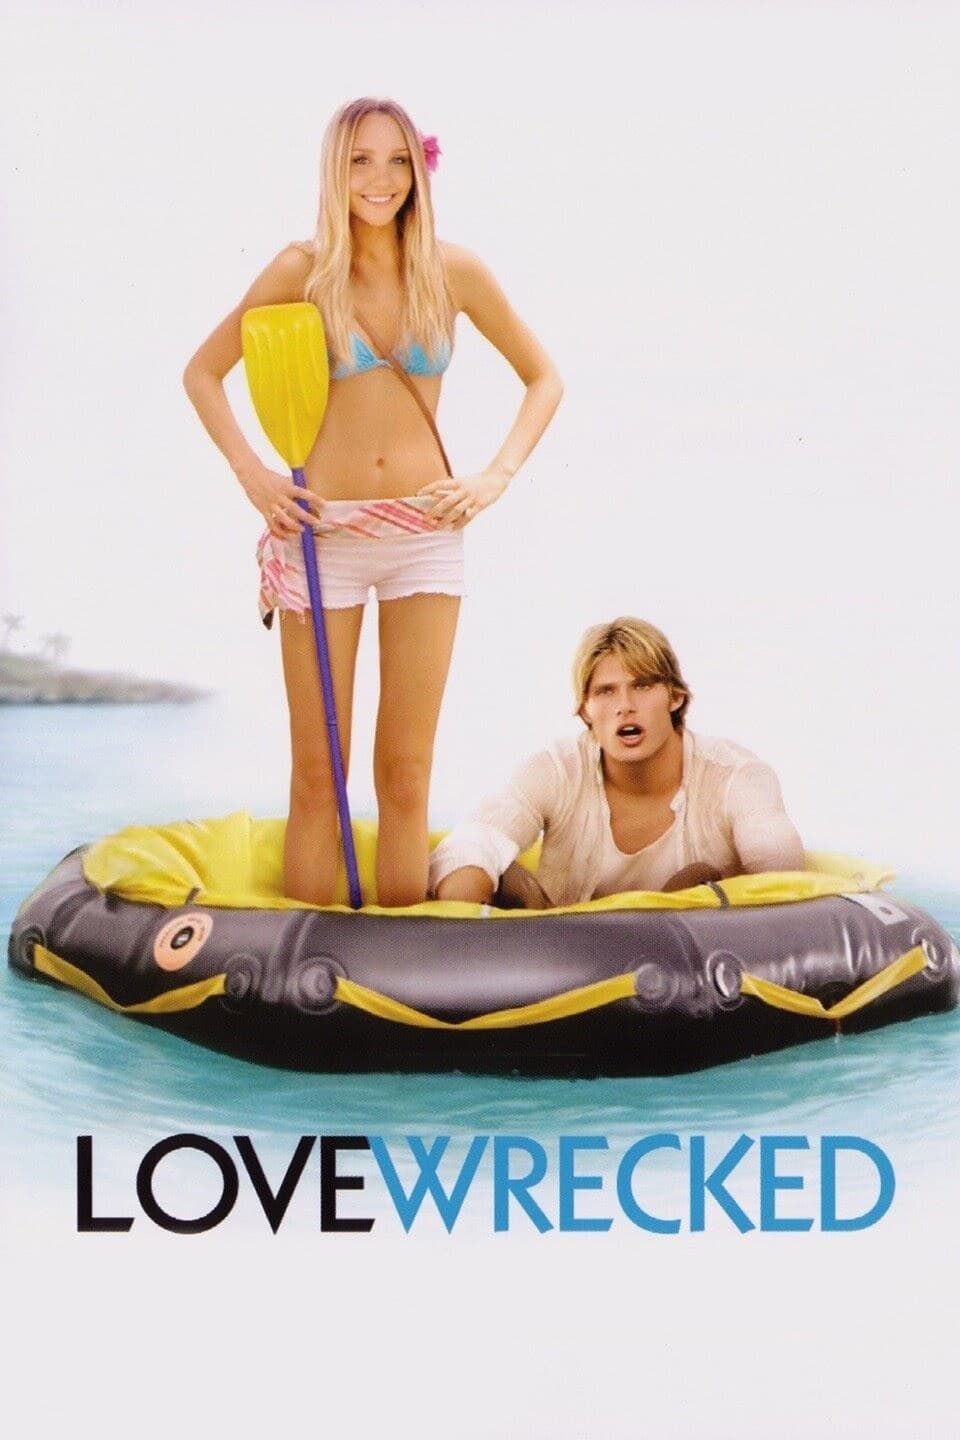 Love Wrecked (2005)